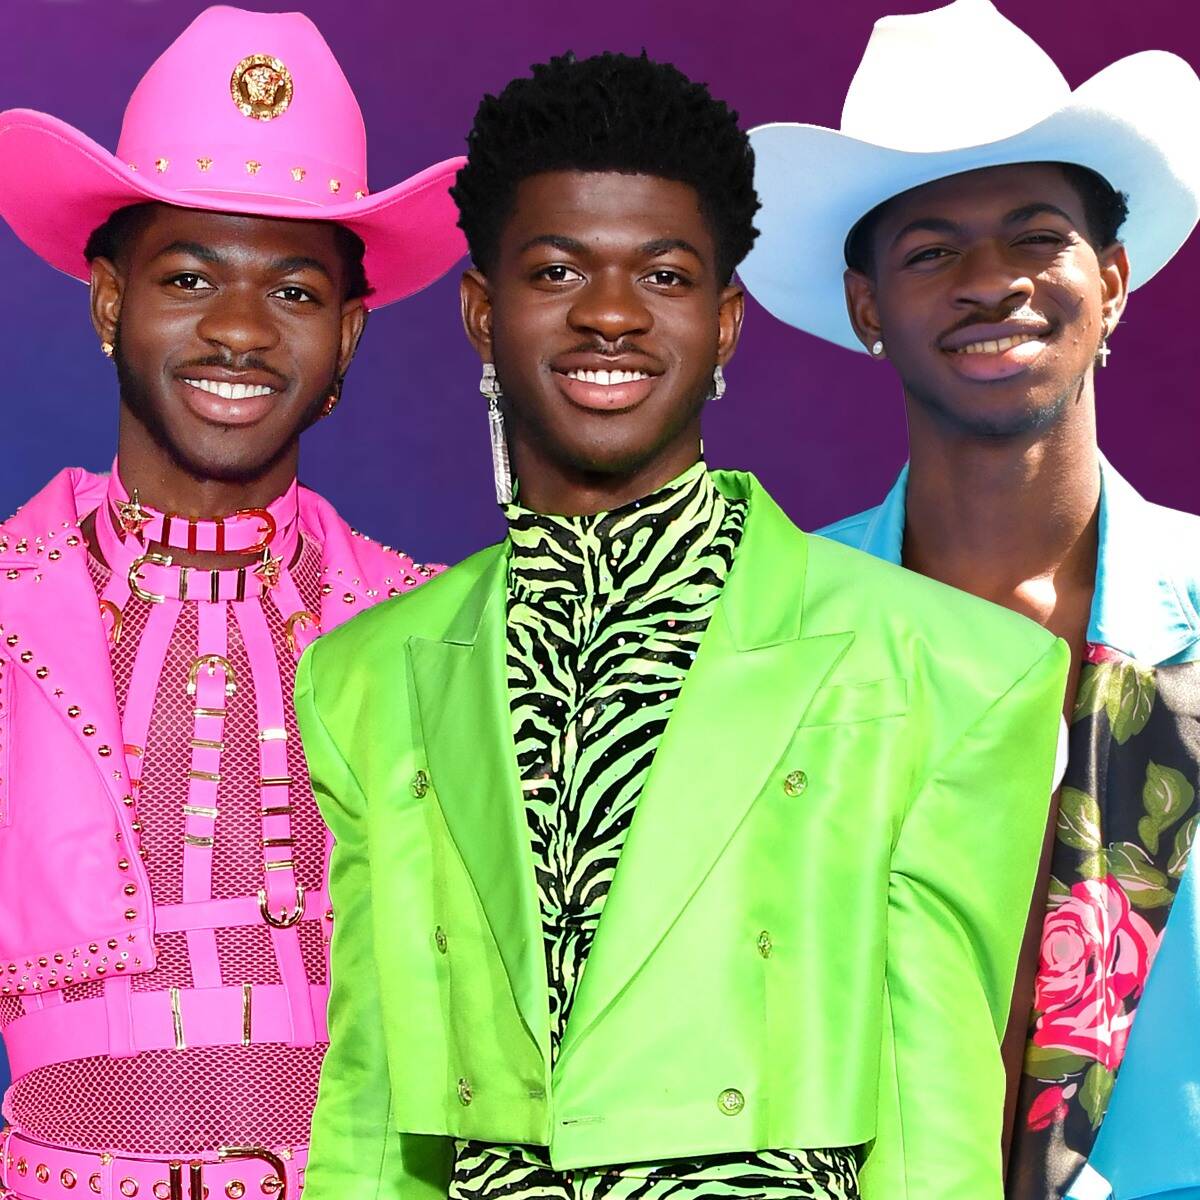 Lil Nas X's Best Fashion Moments Prove He's a Fashion Daredevil! Online